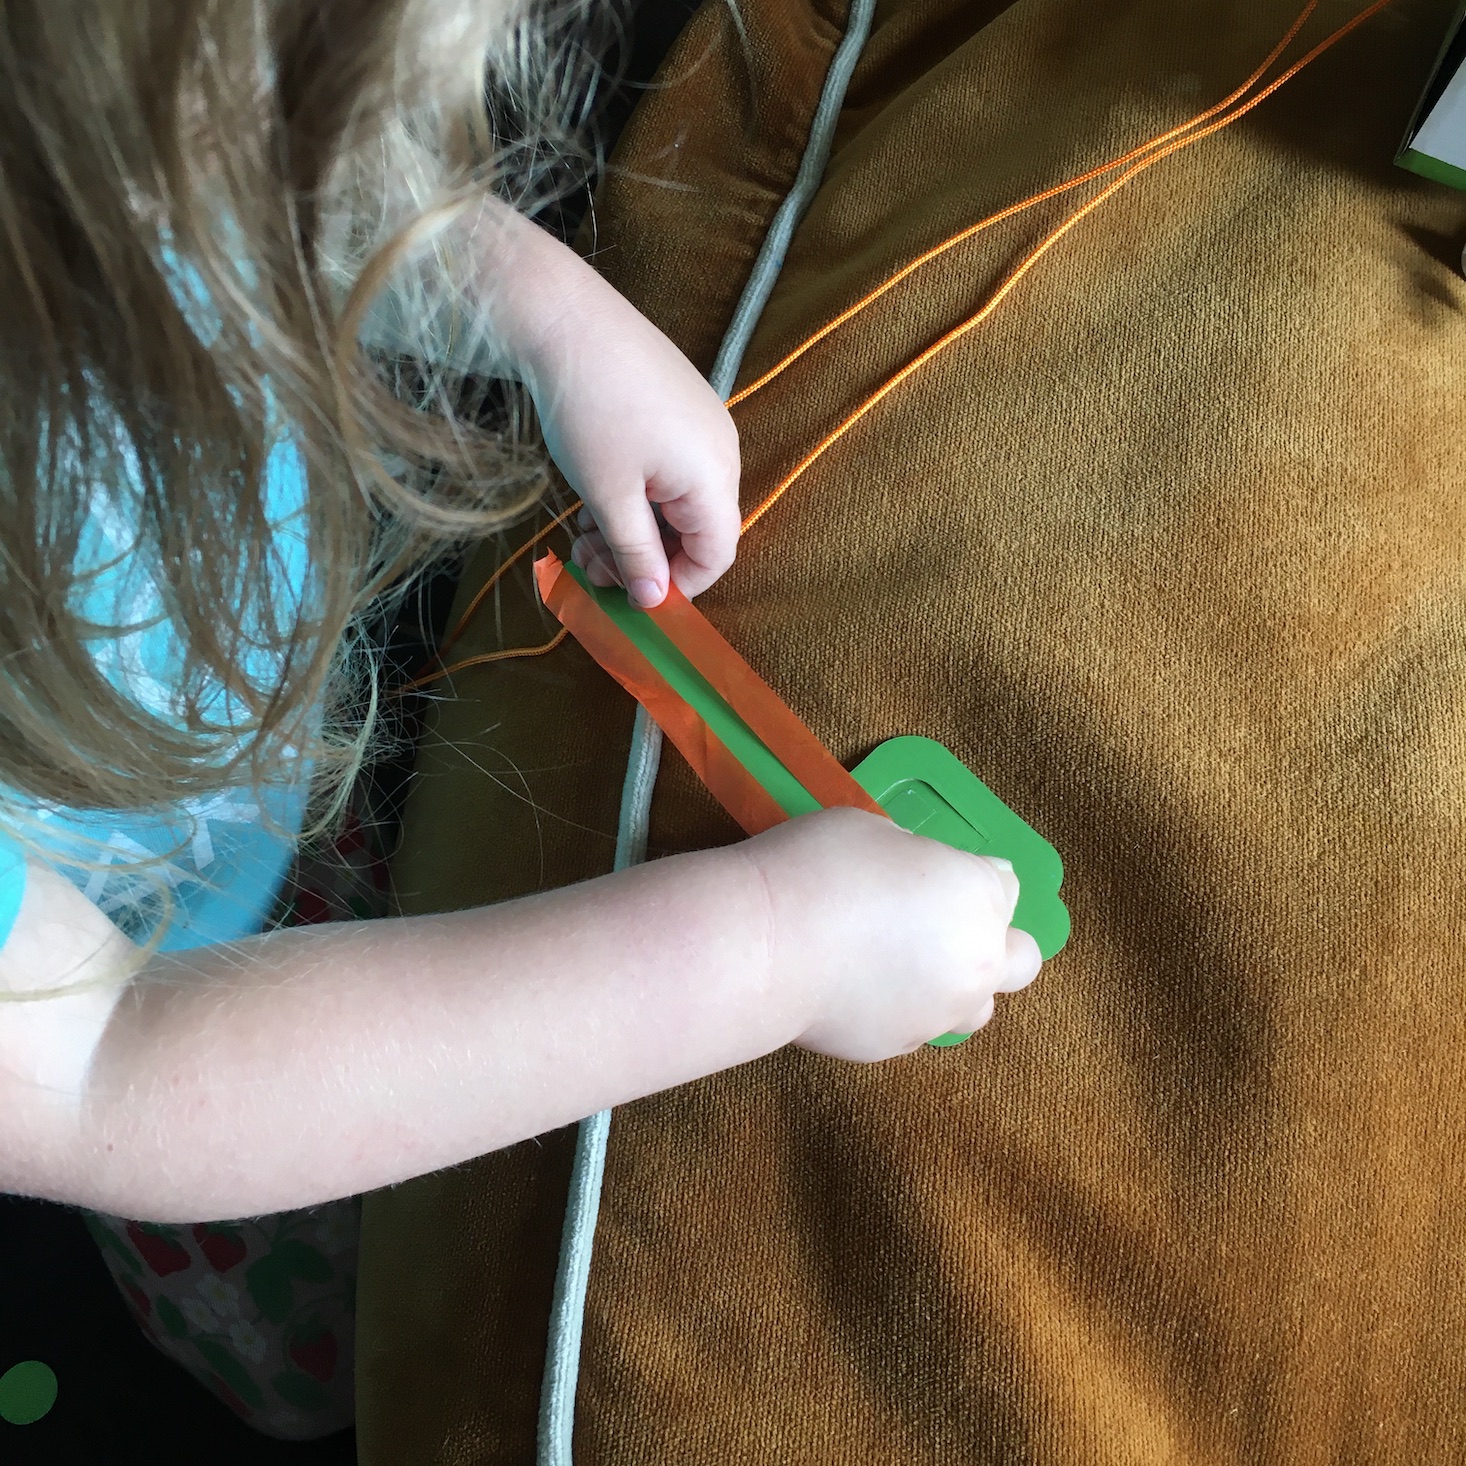 Kid adding tissue paper "fire" to a paper dragon